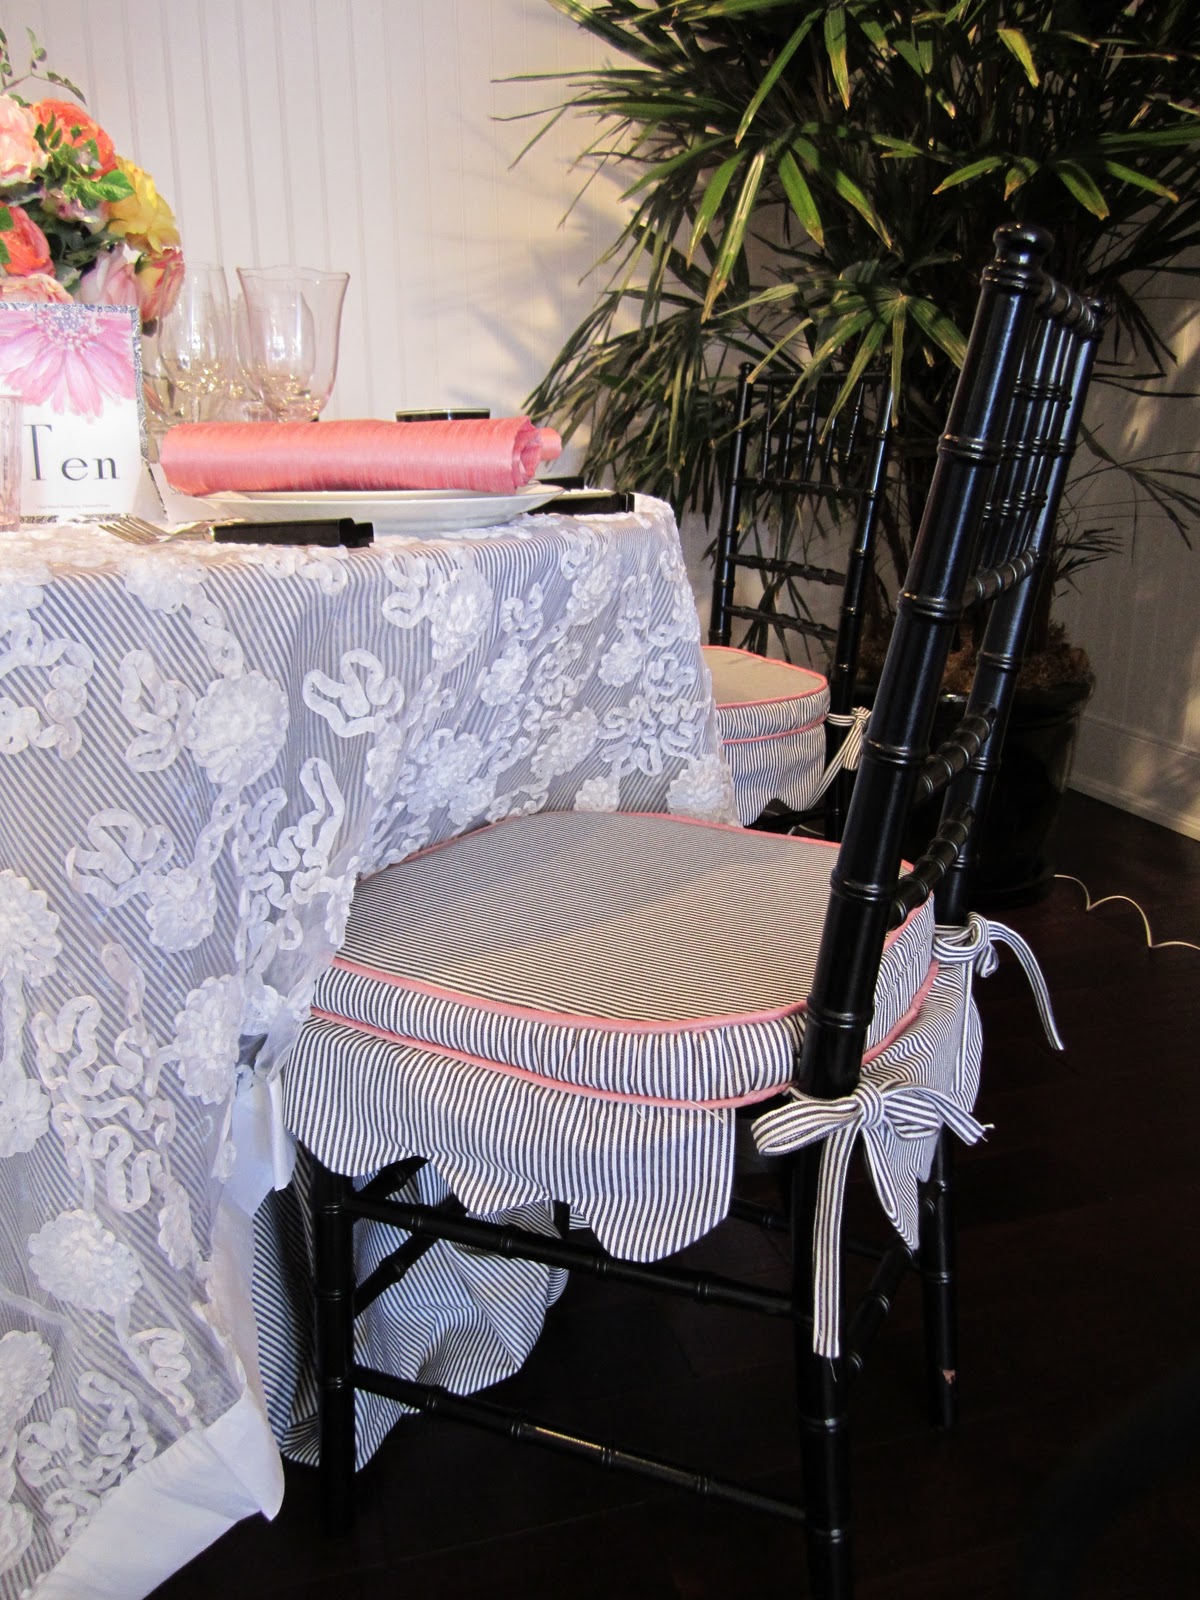 classic • casual • home: Ready for a Party? Check Out These Table Linens